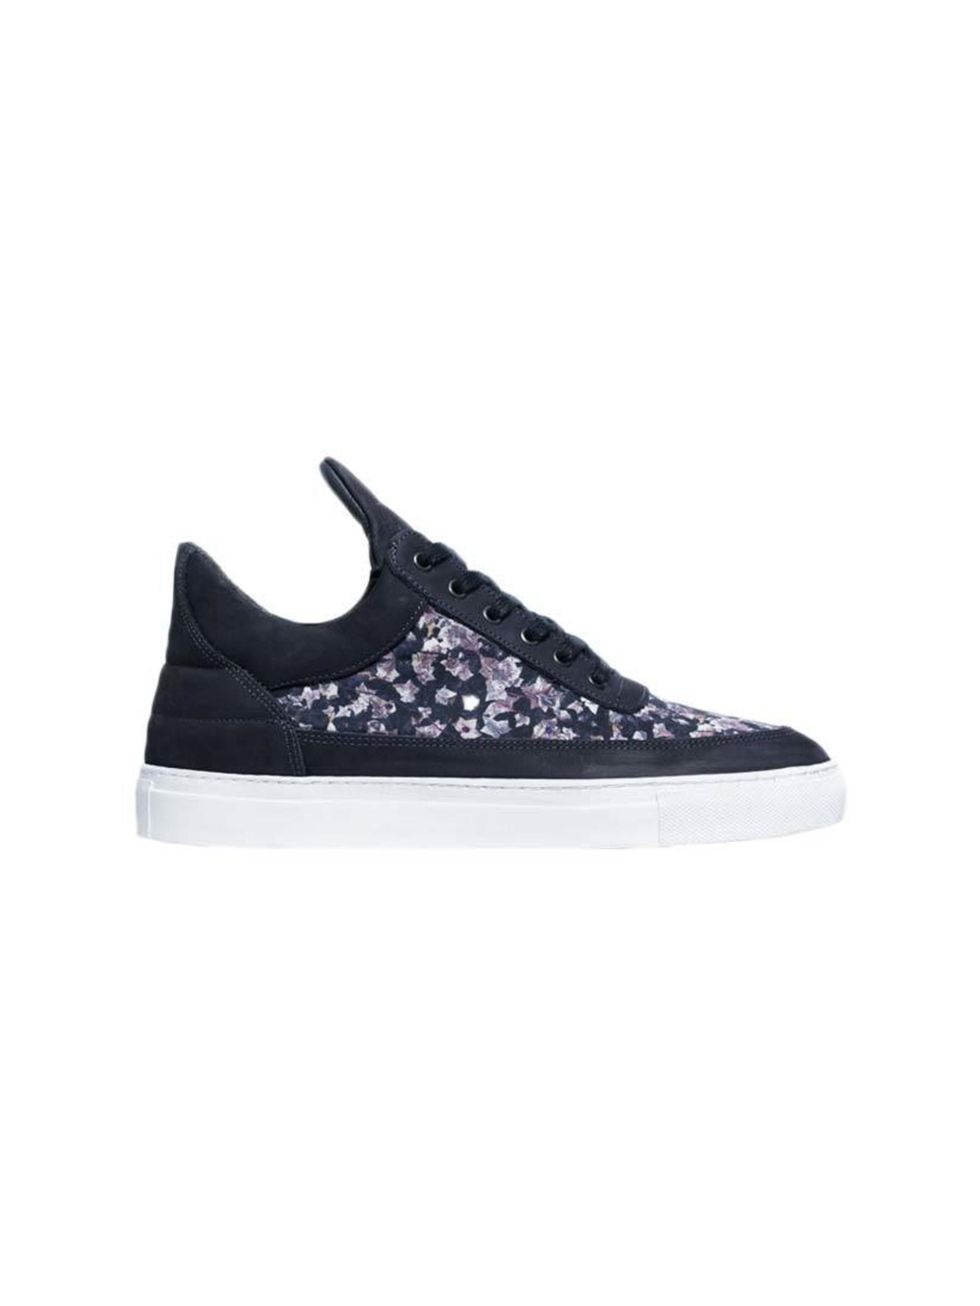 <p>Accessories Editor Donna Wallace has these printed trainers in her sights.</p>

<p> </p>

<p><a href="https://www.fillingpieces.com/all-models/low-top-liberty-london-navy" target="_blank">Filling Pieces</a> trainers, £135</p>